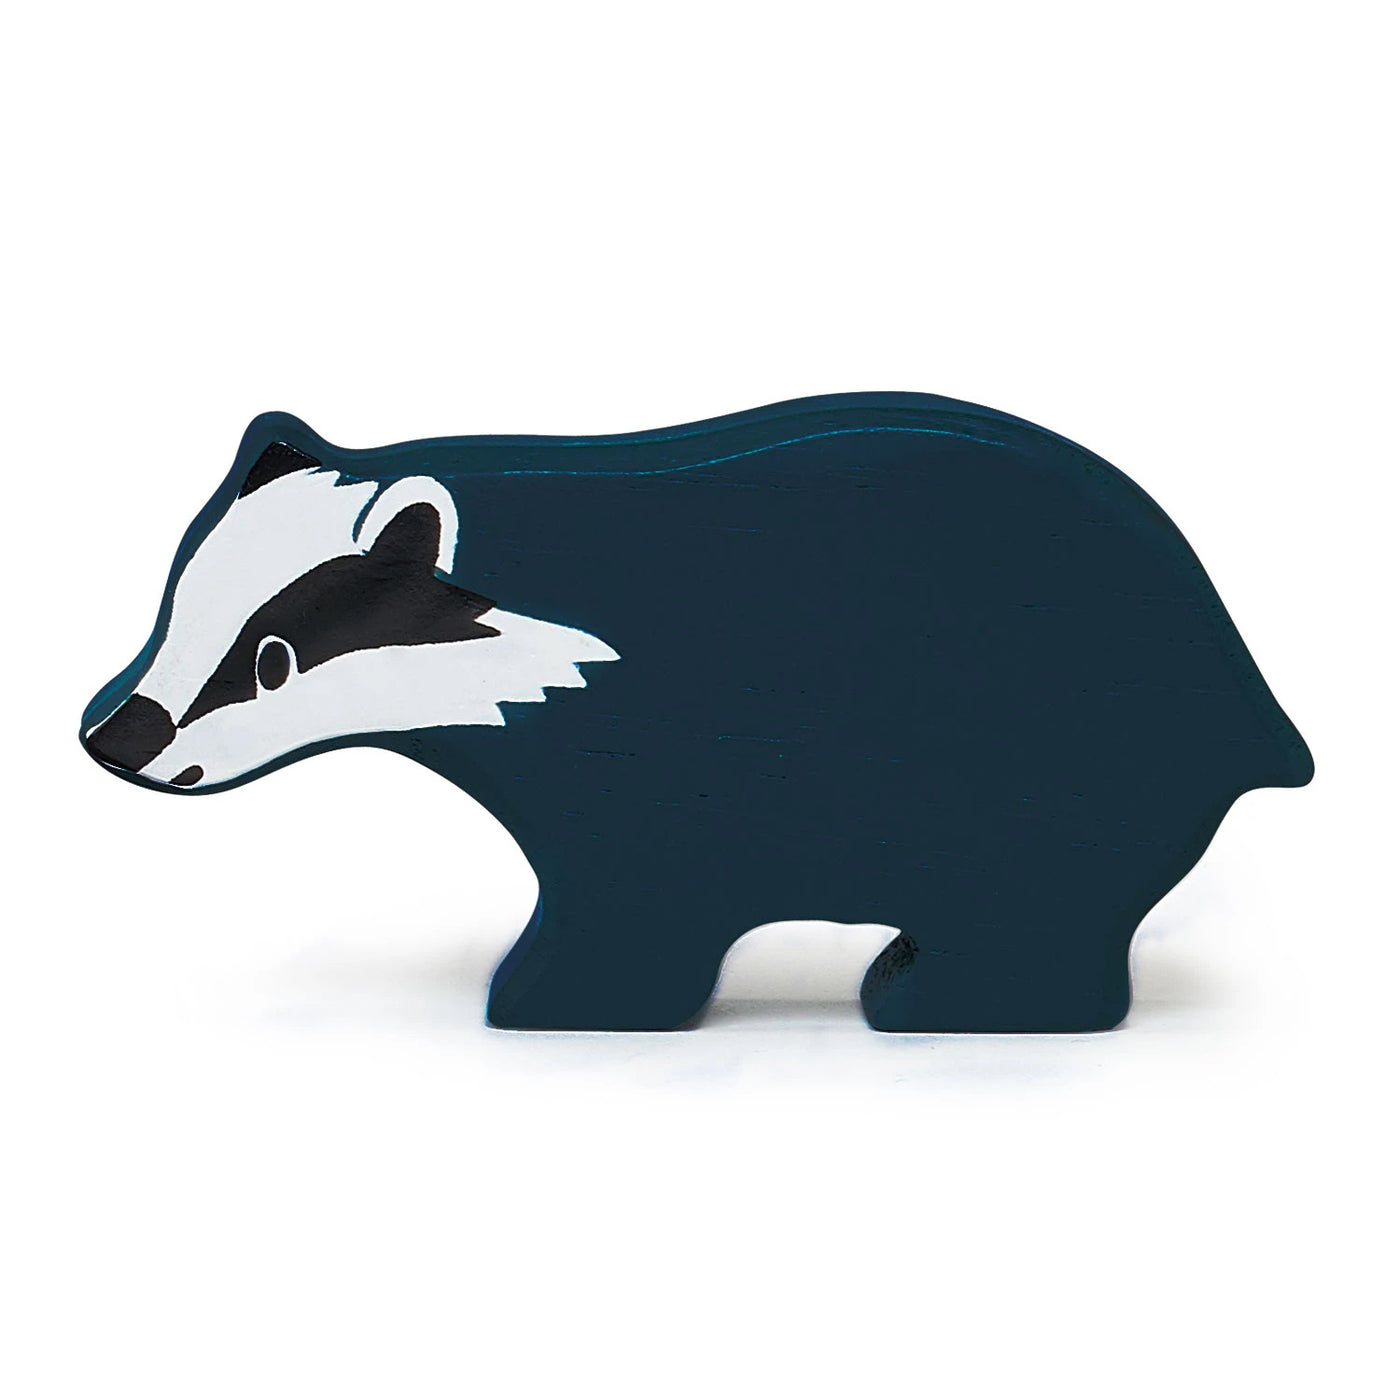 Wooden Woodland Badger Animal toy for kids made of eco-friendly wood